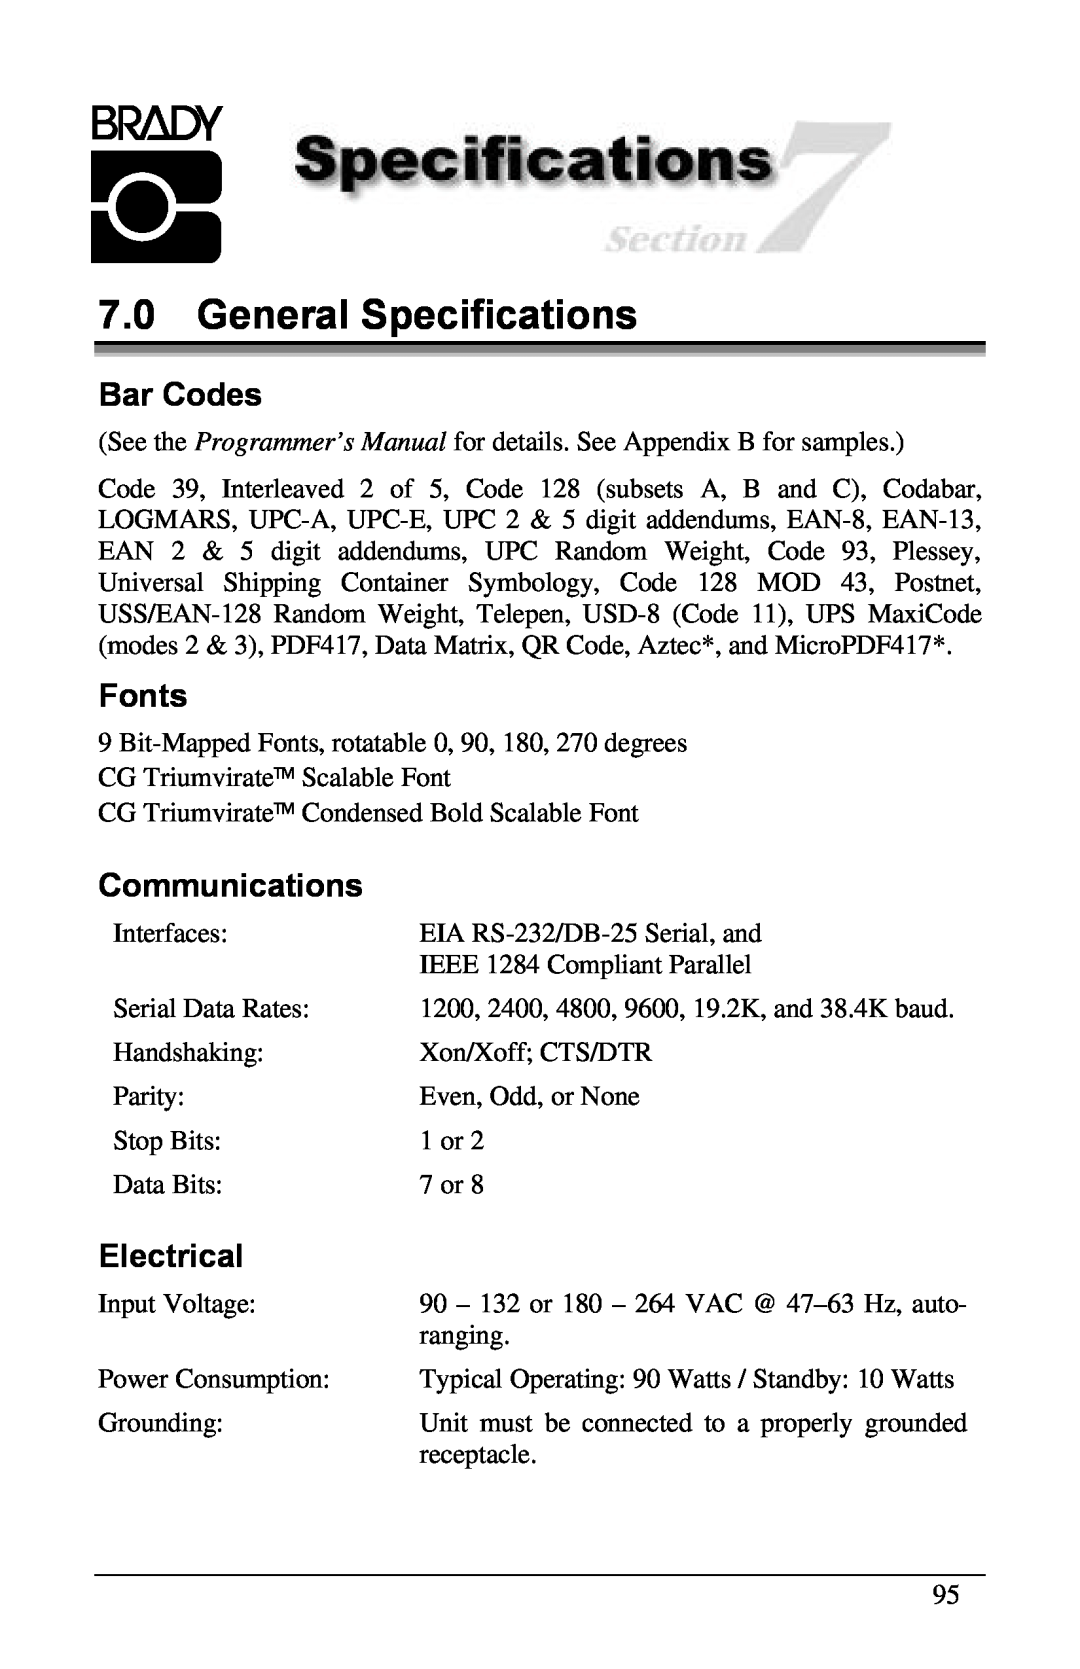 Brady 3481, 6441, 2461 manual General Specifications, Bar Codes, Fonts, Communications, Electrical 